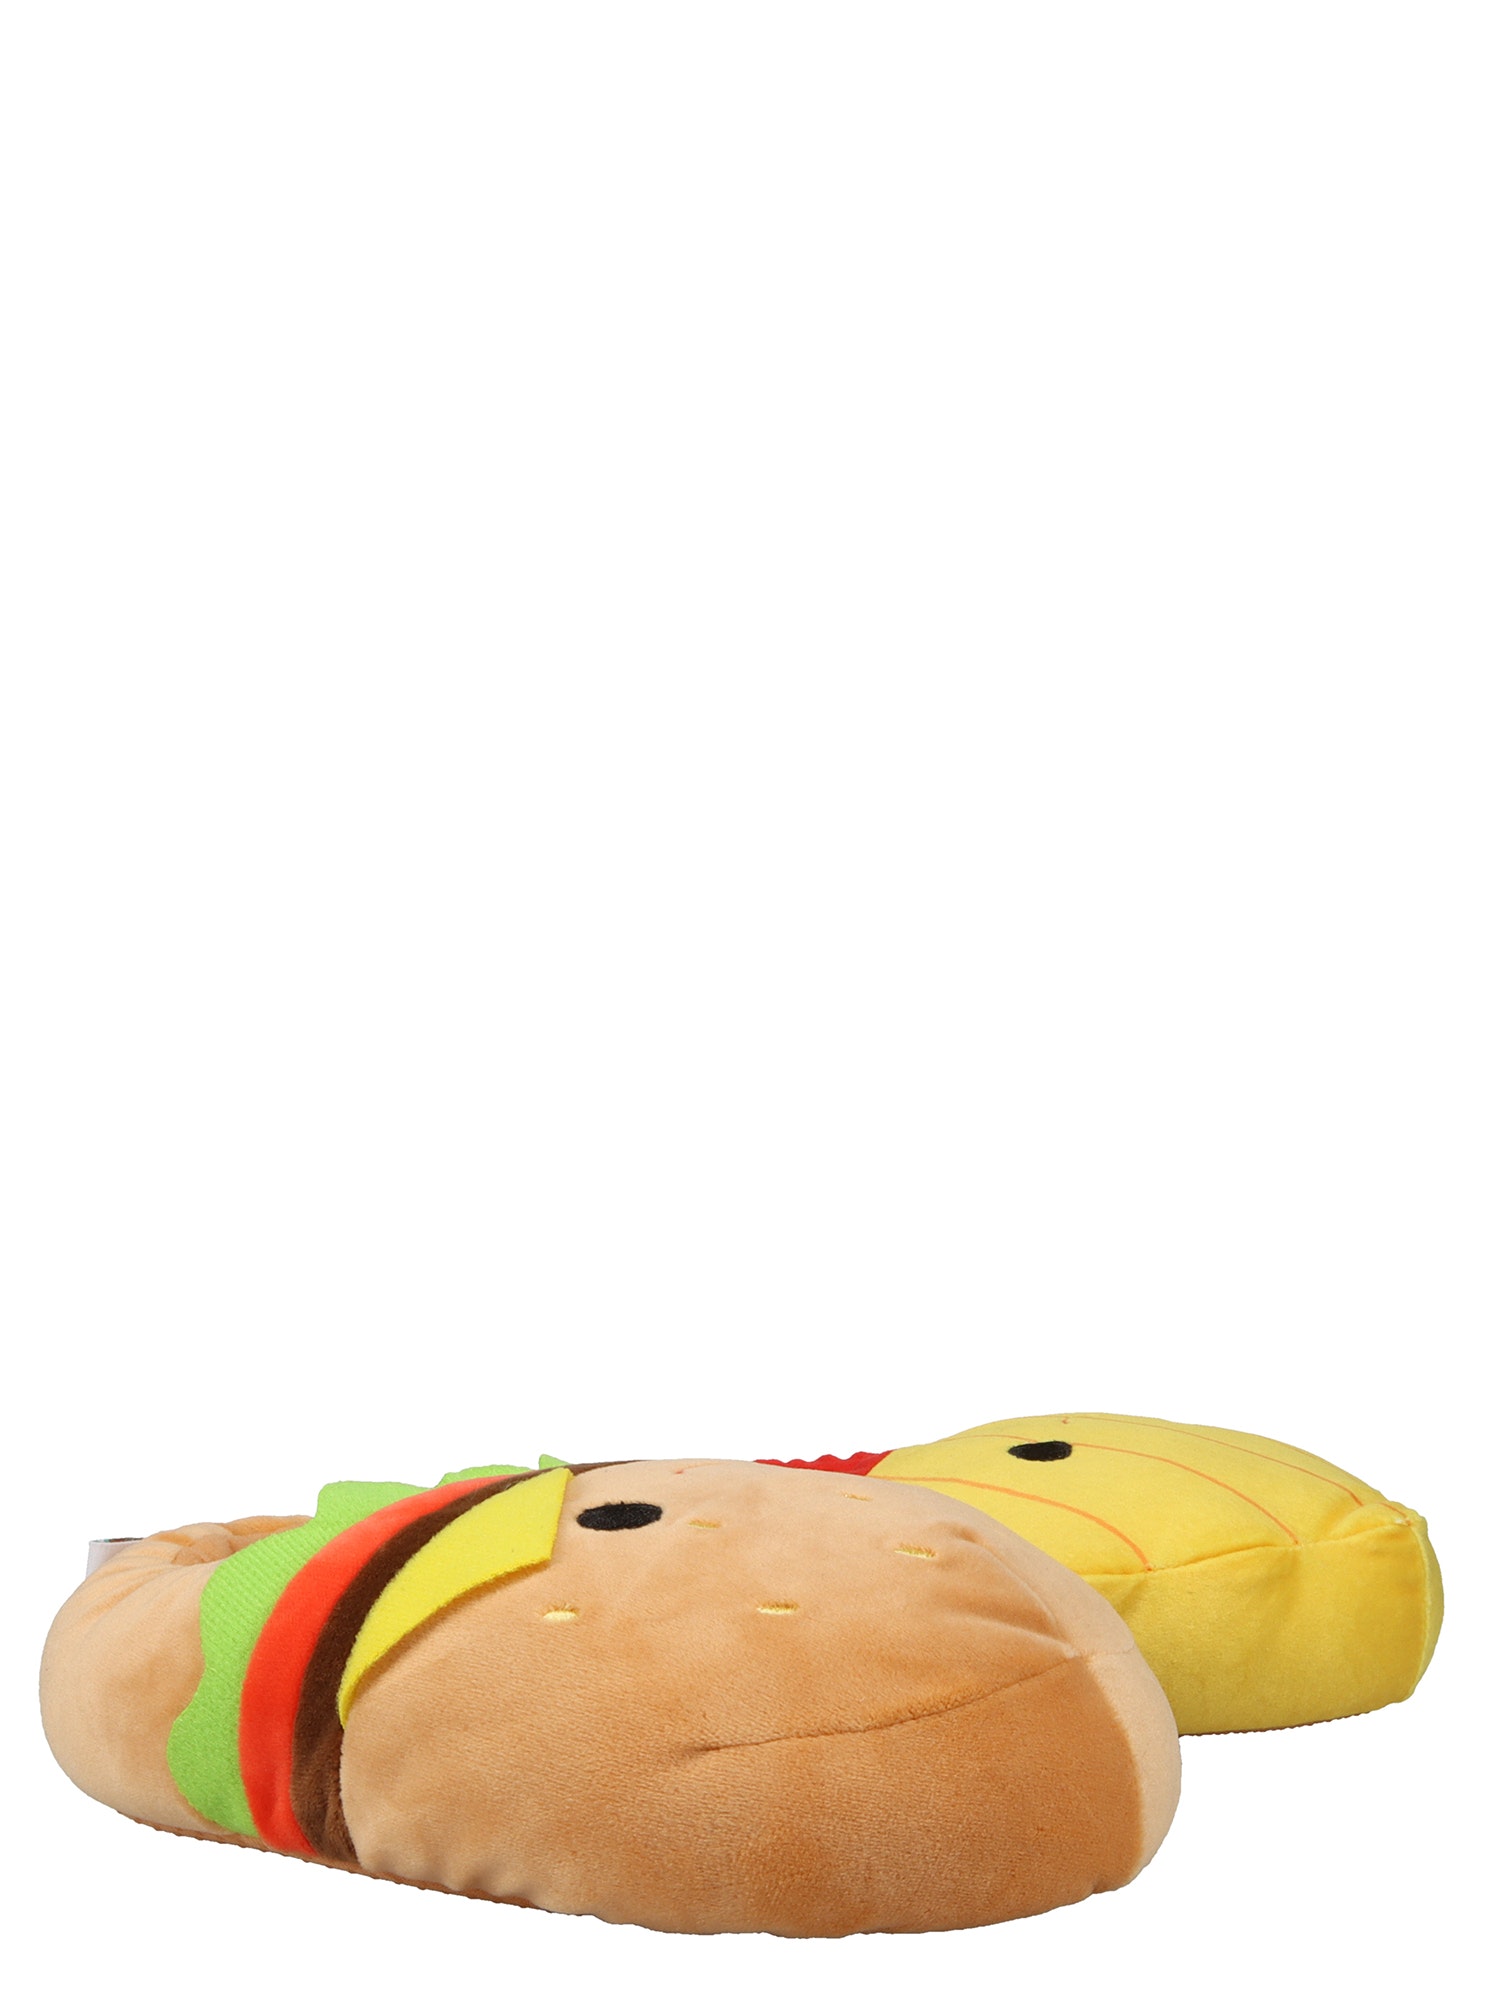 Squishmallows Kids Cheeseburger & Fries Mix Match Slippers - image 2 of 6